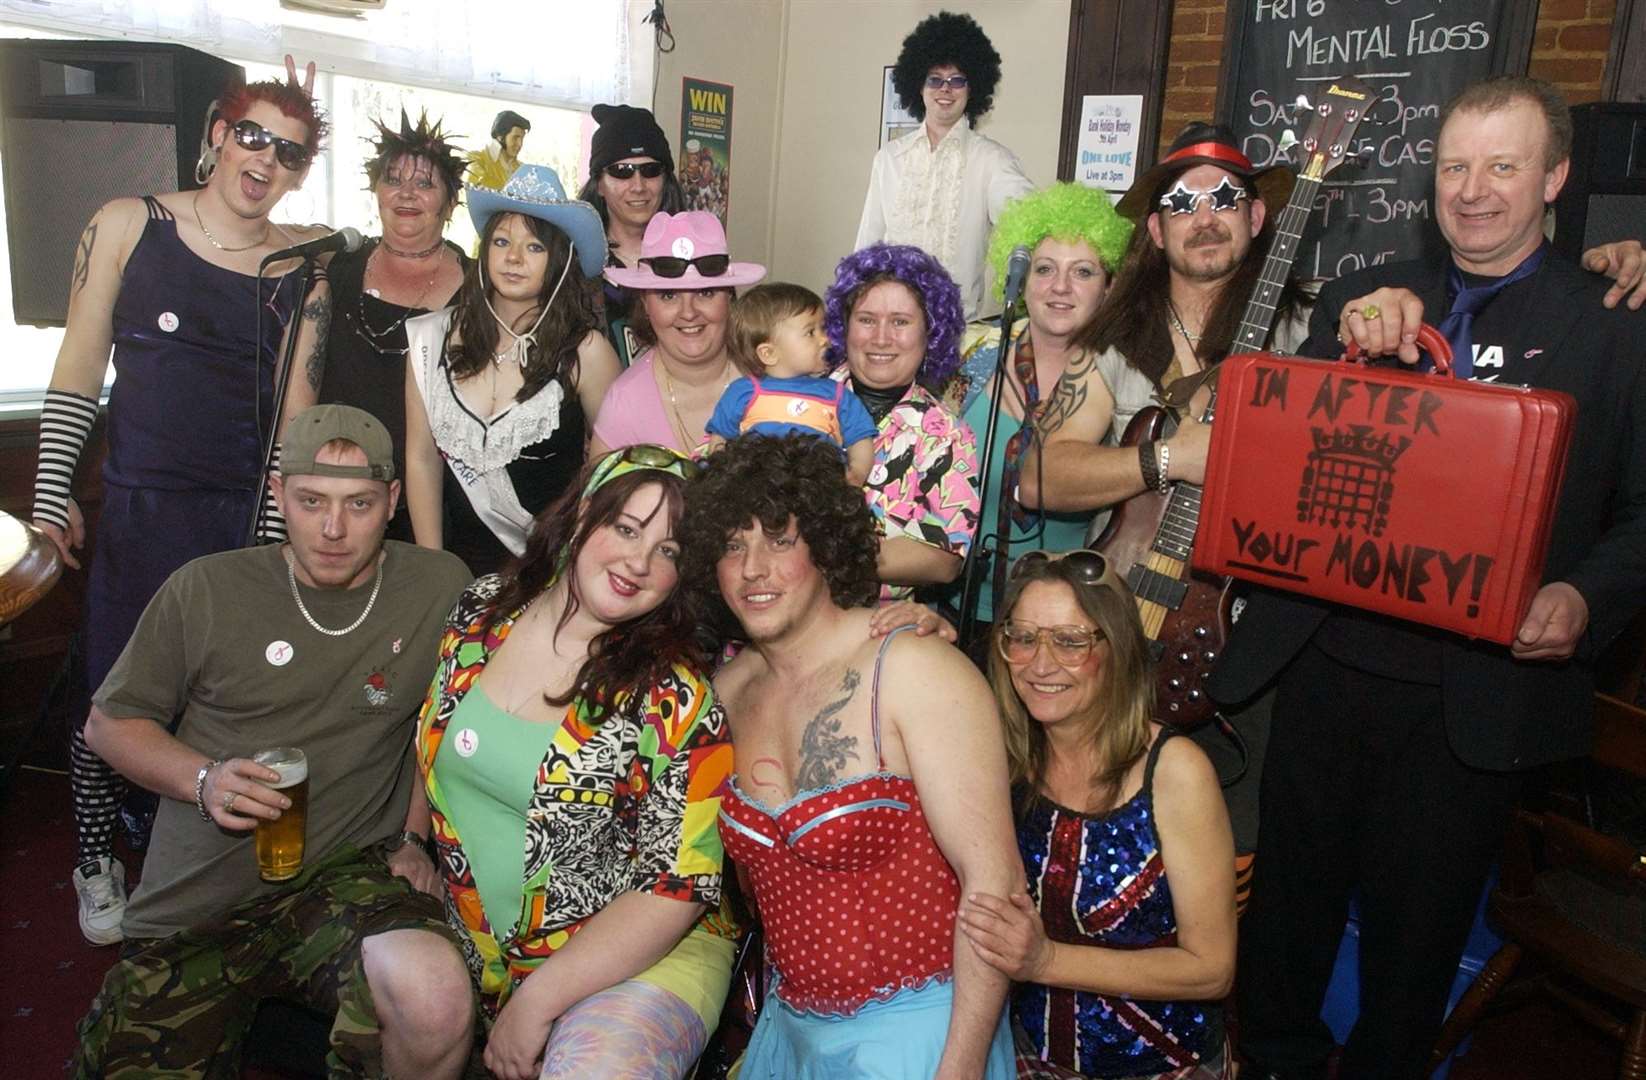 Outrageous characters at the Queen Victoria pub's "bad taste day" in Herne Bay in April 2007. The pub, dating back to 1864, closed in 2013 and is set to be turned into a block of flats